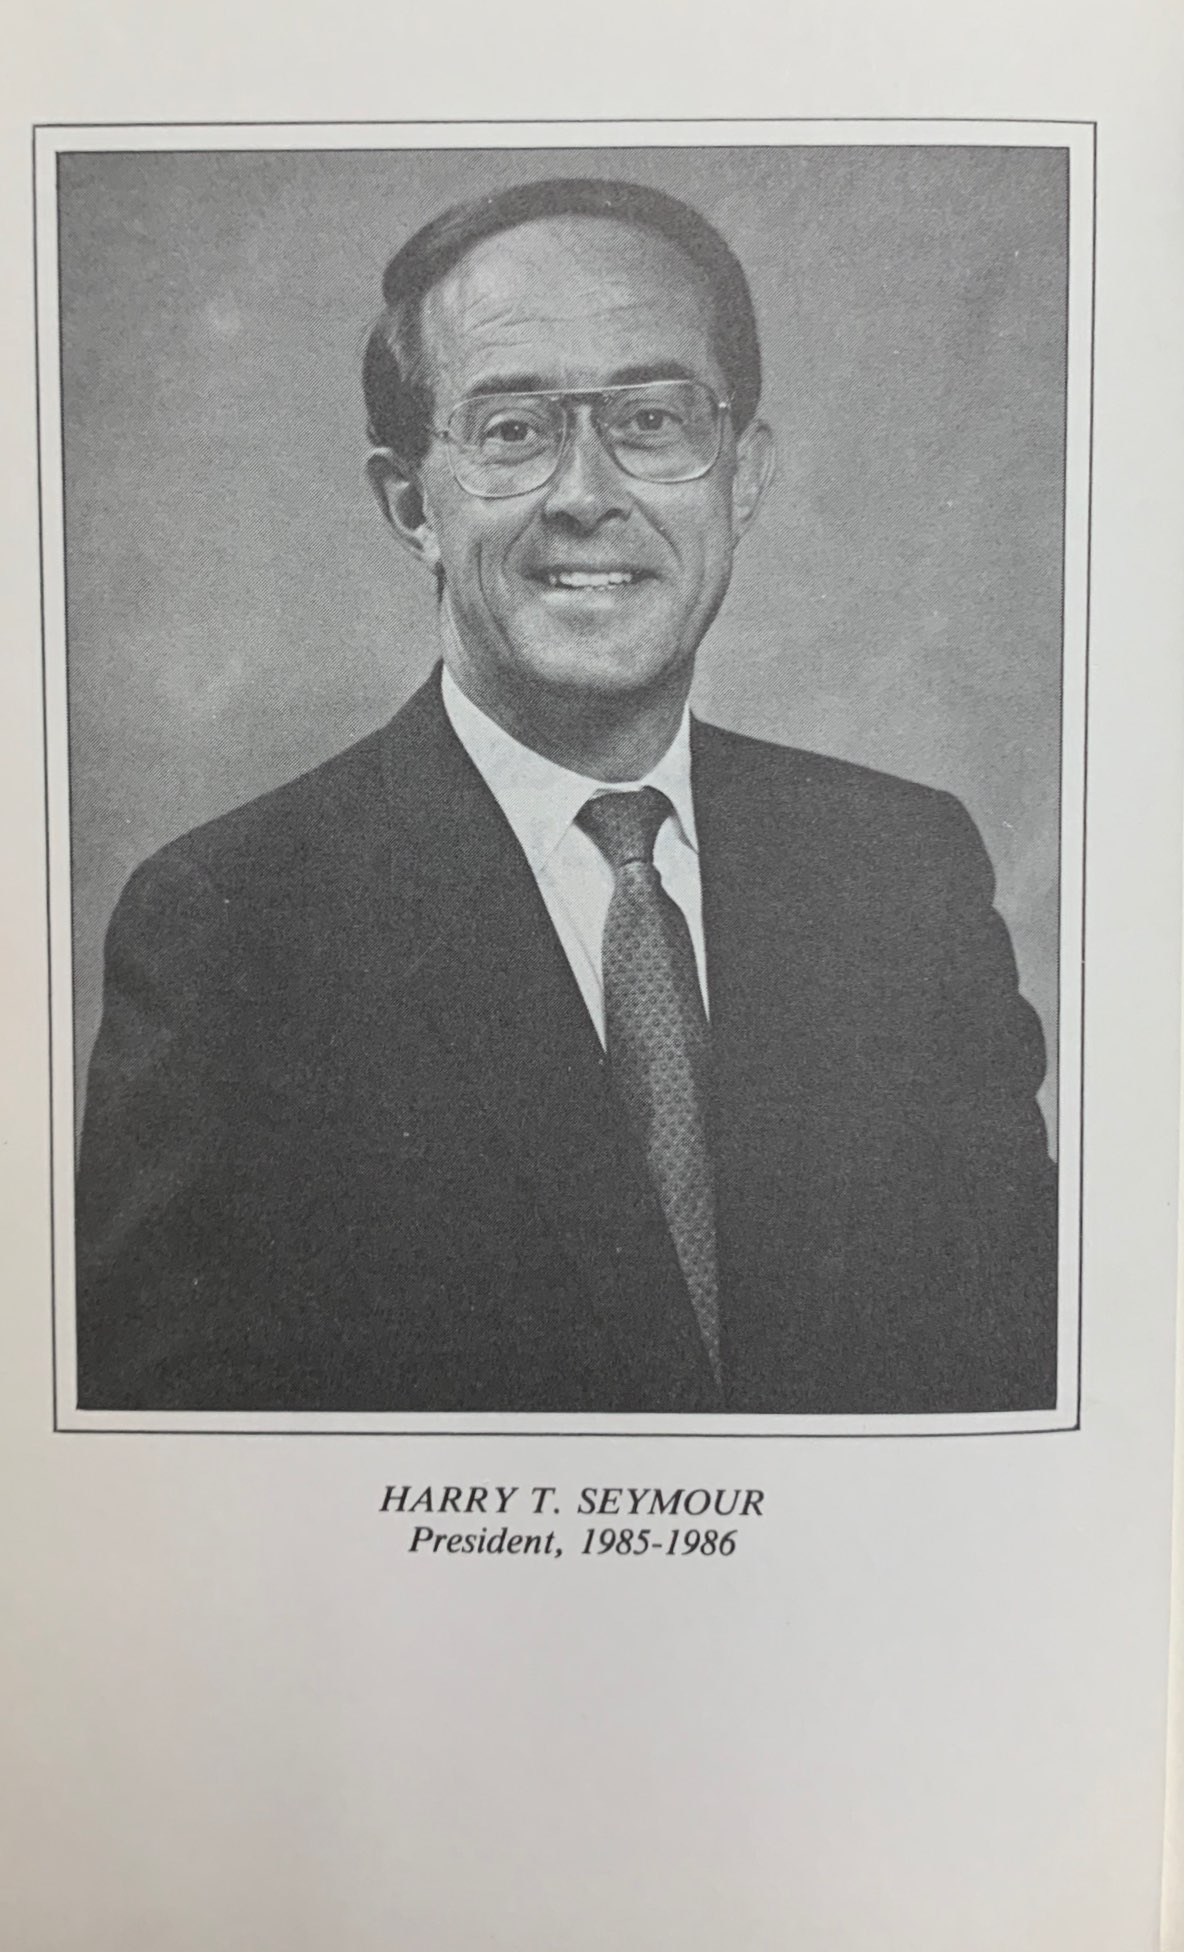 http://alt=%20Headshot%20of%20a%20smiling%20man,%20Harry%20T%20Seymour,%20wearing%20glasses%20with%20a%20suit%20and%20tie.